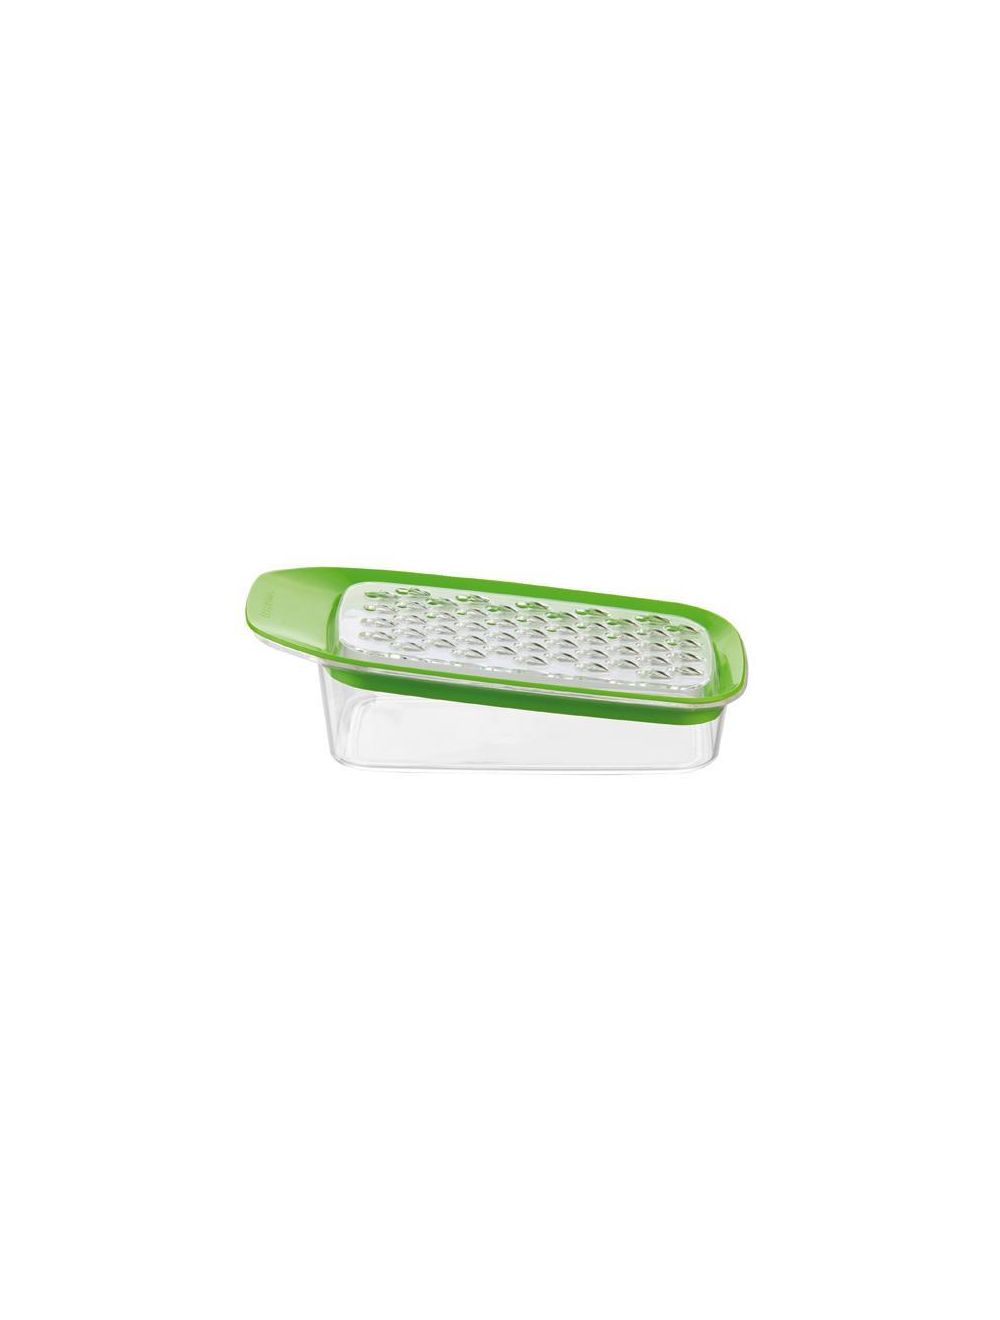 Tescoma Vitamino Multifunctional Grater - Assorted Colour